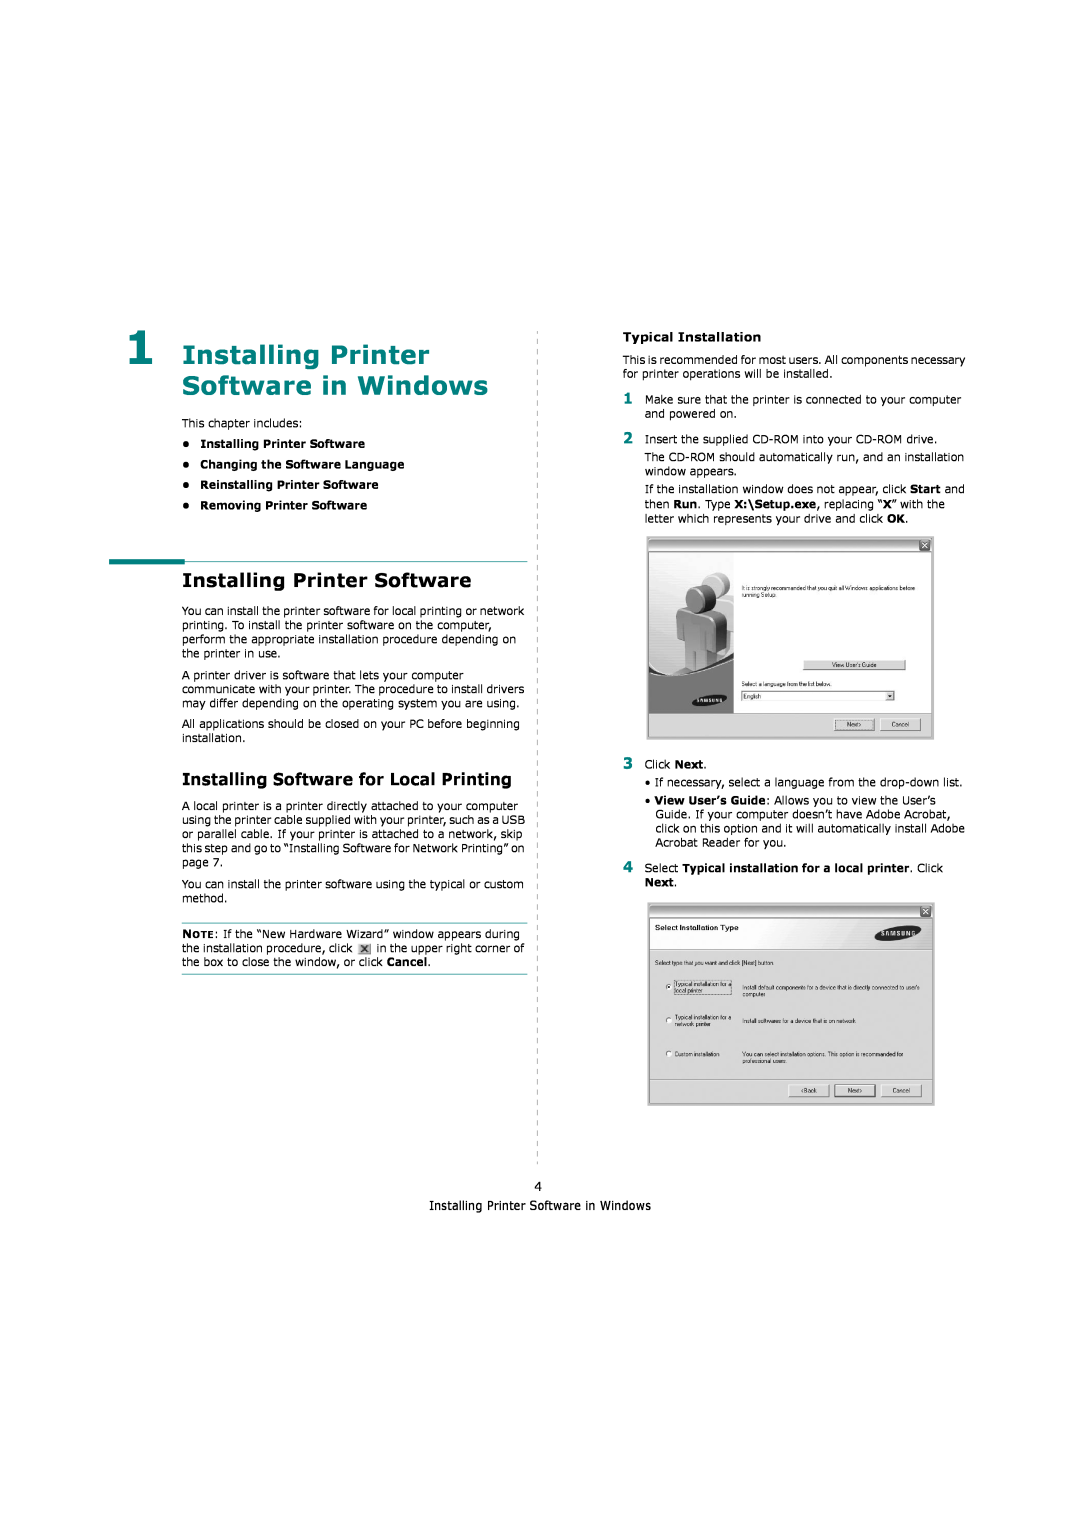 Samsung ML-4550 manual Installing Printer Software in Windows, Installing Software for Local Printing, Typical Installation 